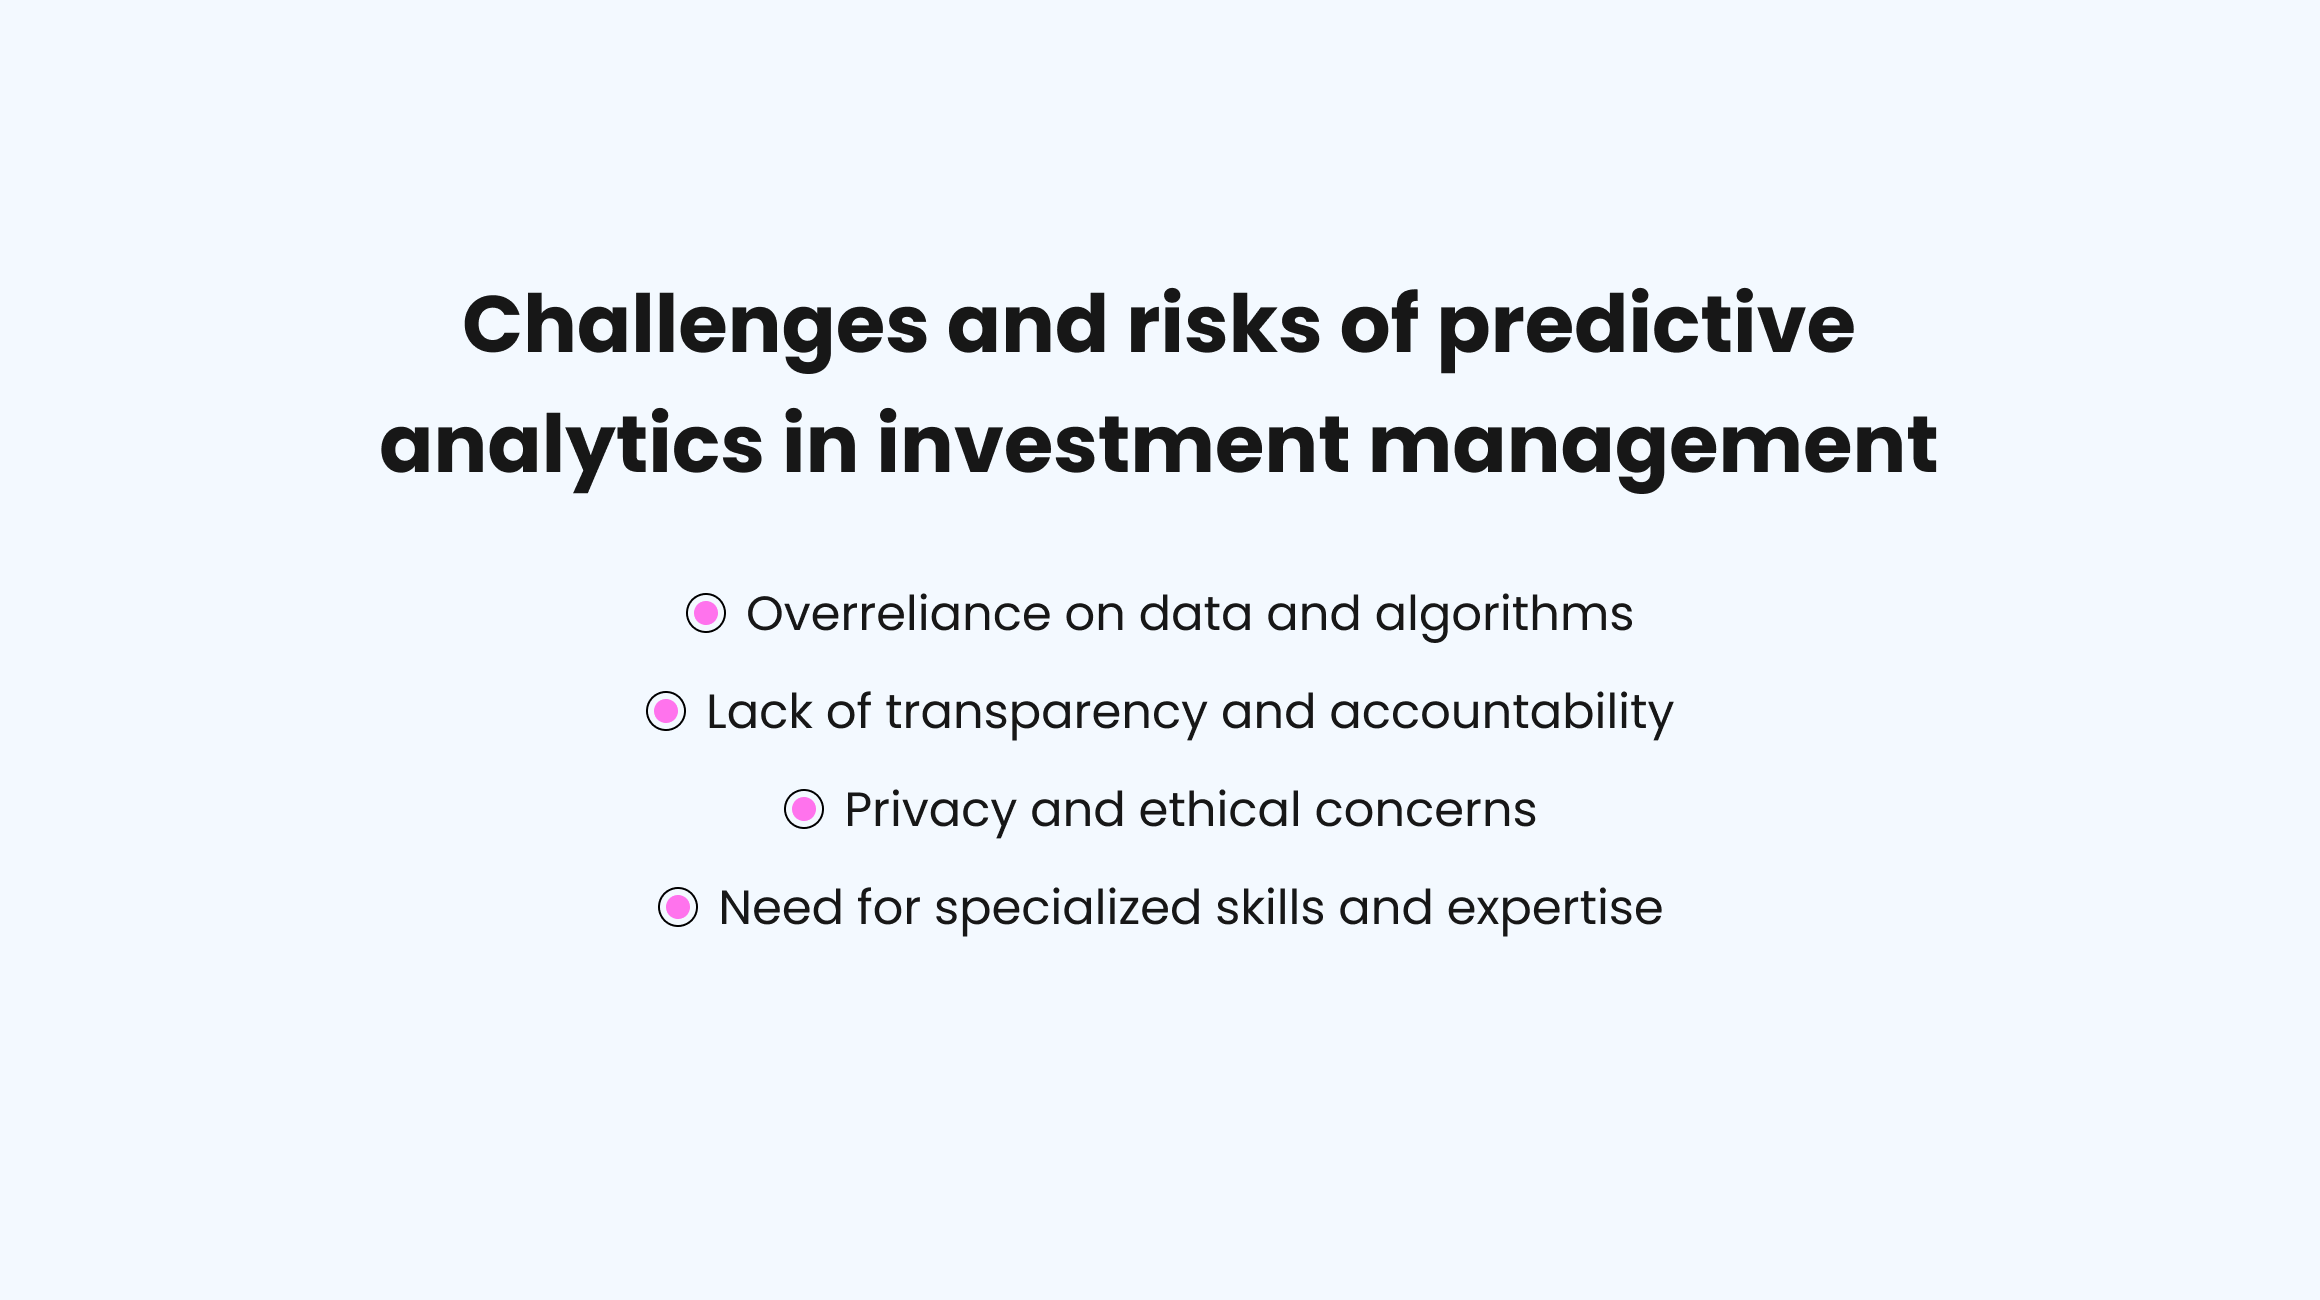 Challenges and risks of predictive analytics in investment management